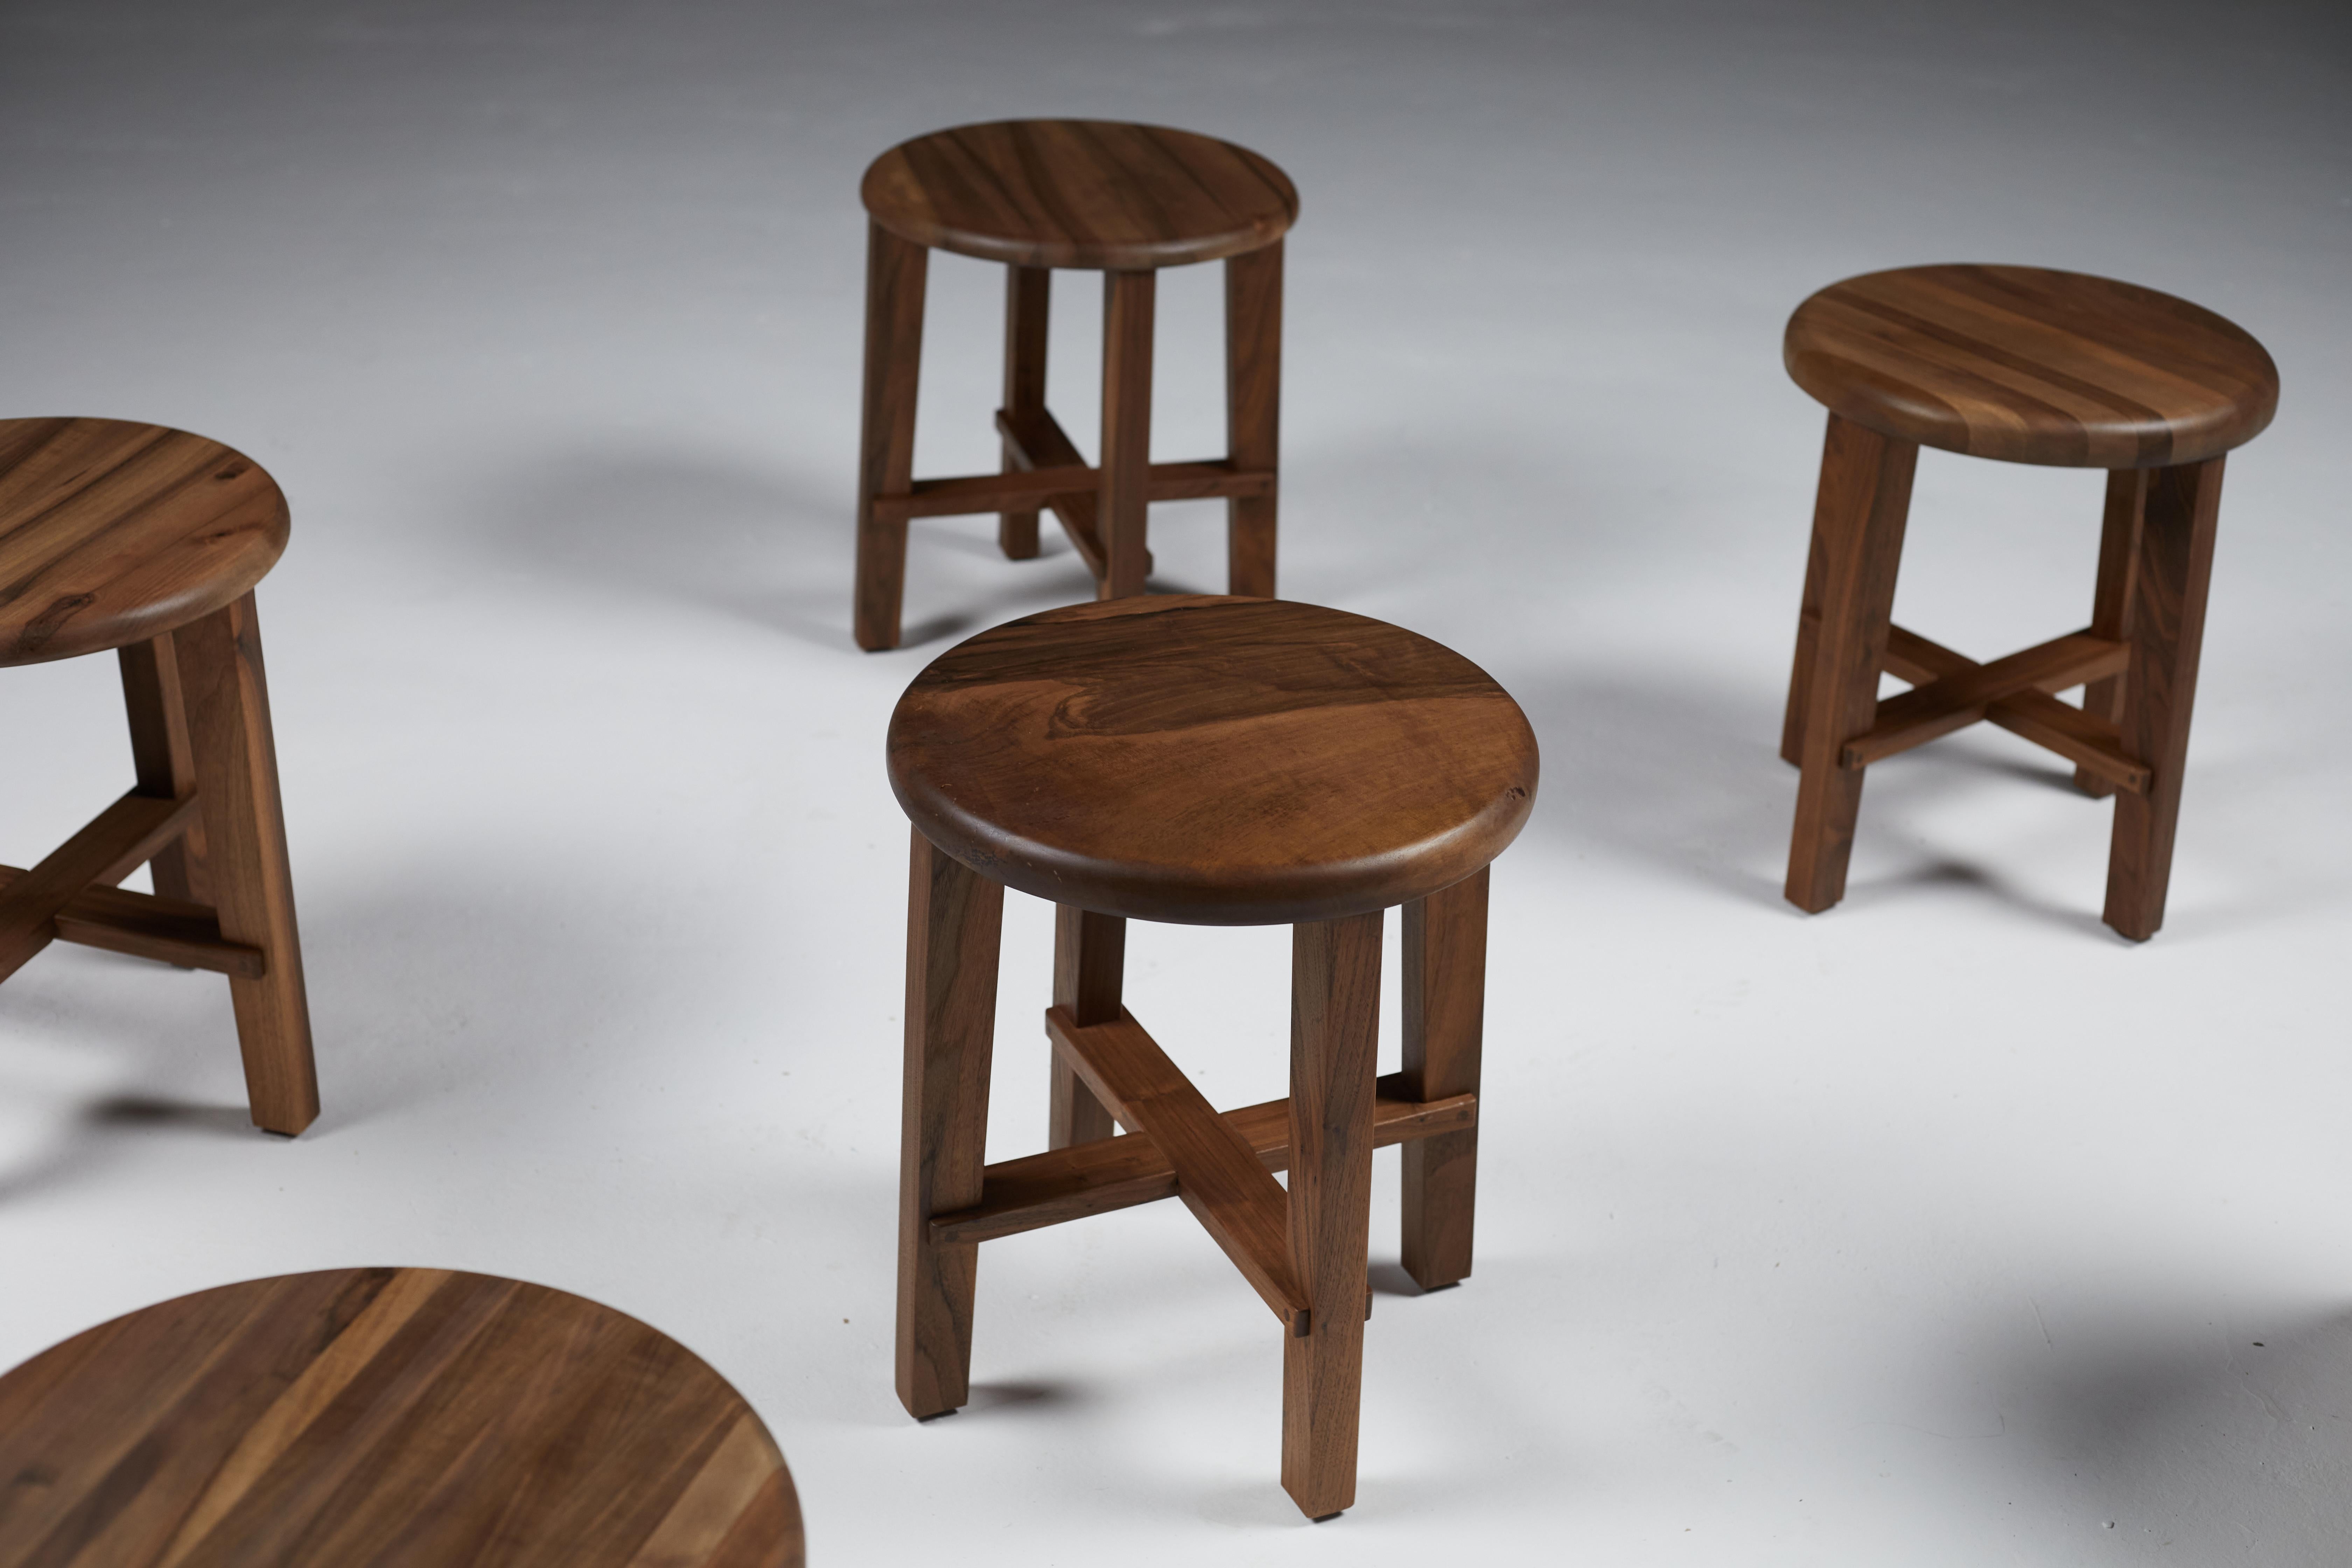 A set of six low stools, the stools can also be used as side tables.
The legs are made of American Black Walnut with the tops of European Walnut.
The finish is a Hard Wax Oil.
Each stool has the consecutive edition-making number 335, numbered 1 to 6